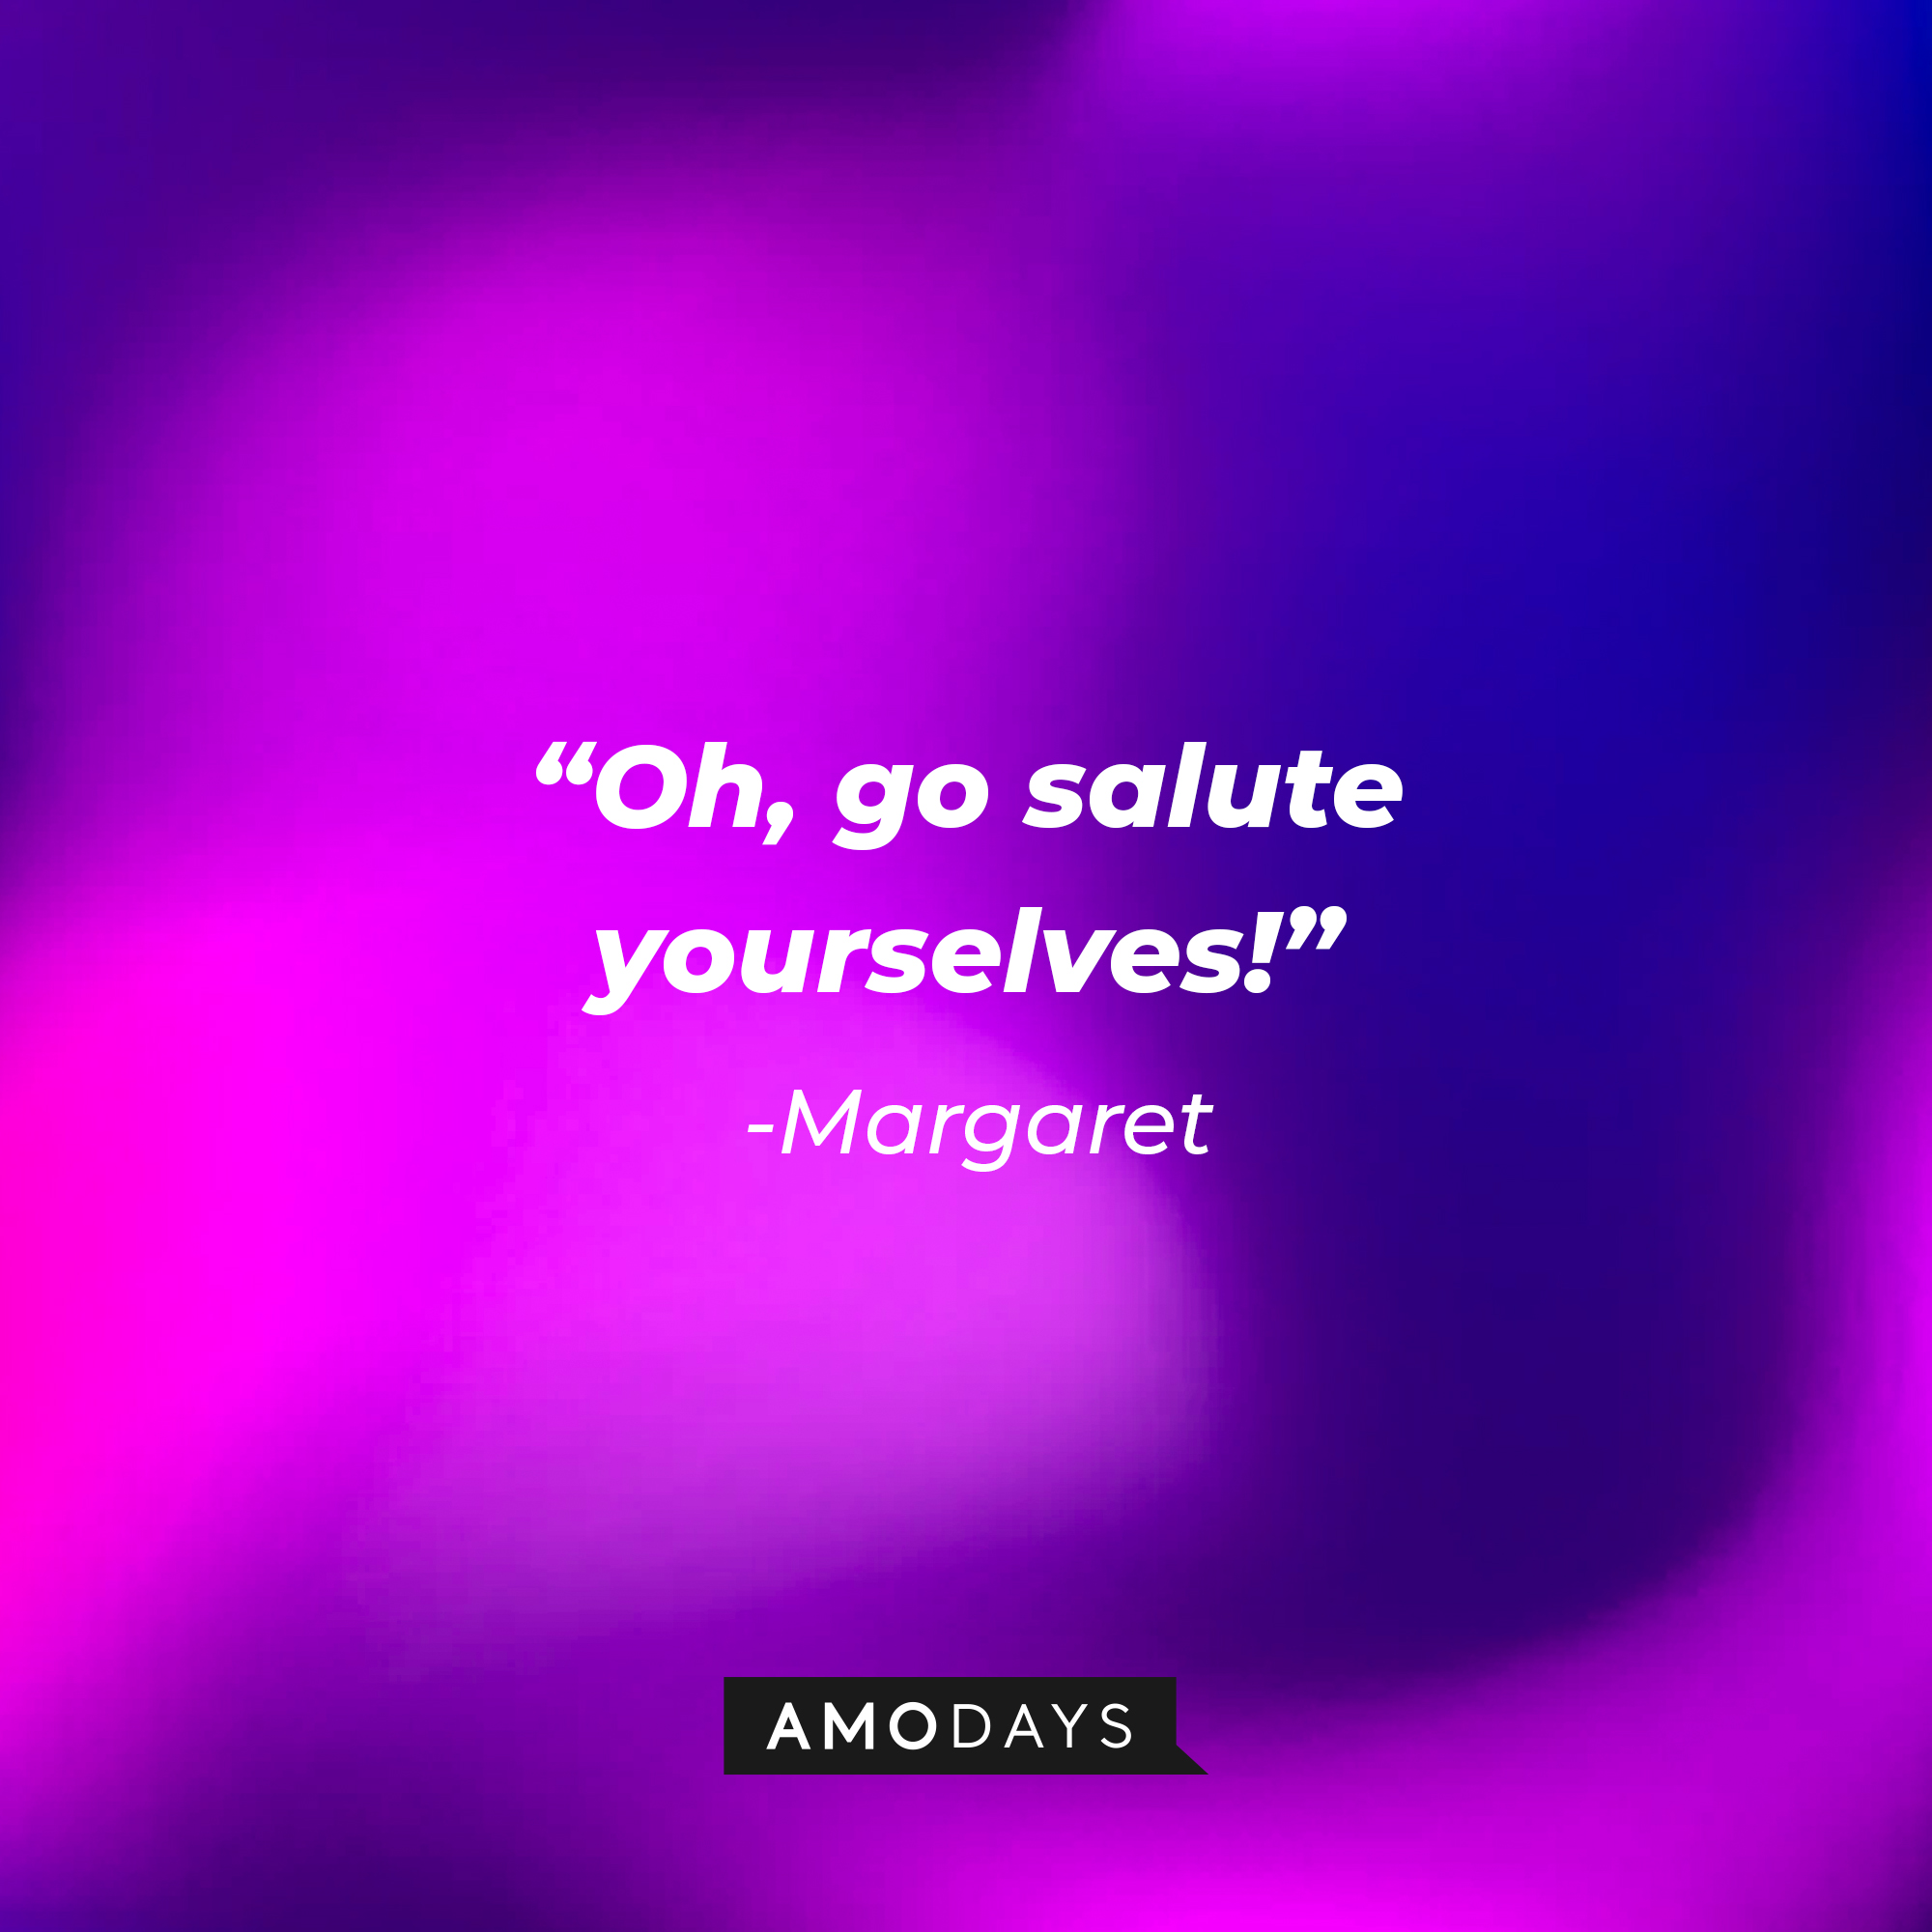 Margaret’s quote: “Oh, go salute yourselves!” | Source: AmoDays